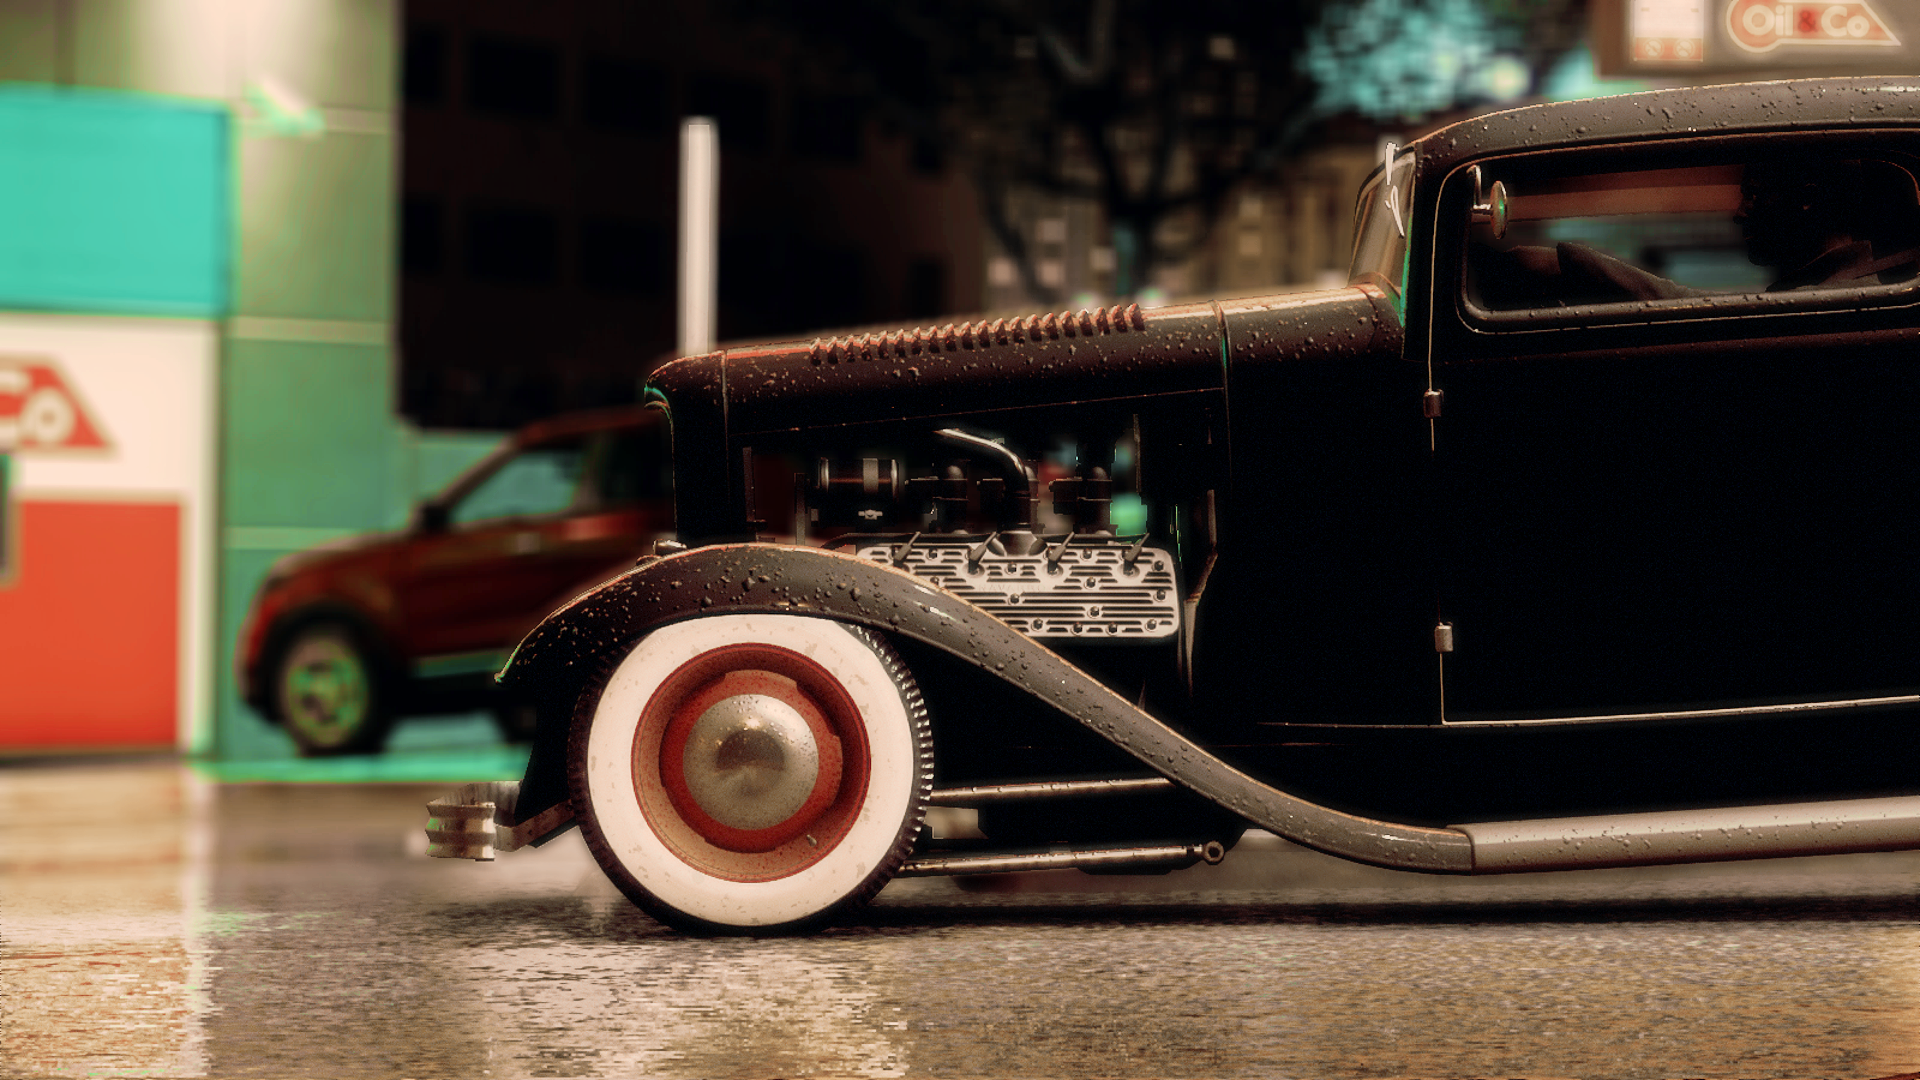 General 1920x1080 Need for Speed Ford Hot Rod Rat Rod car custom video games vehicle CGI